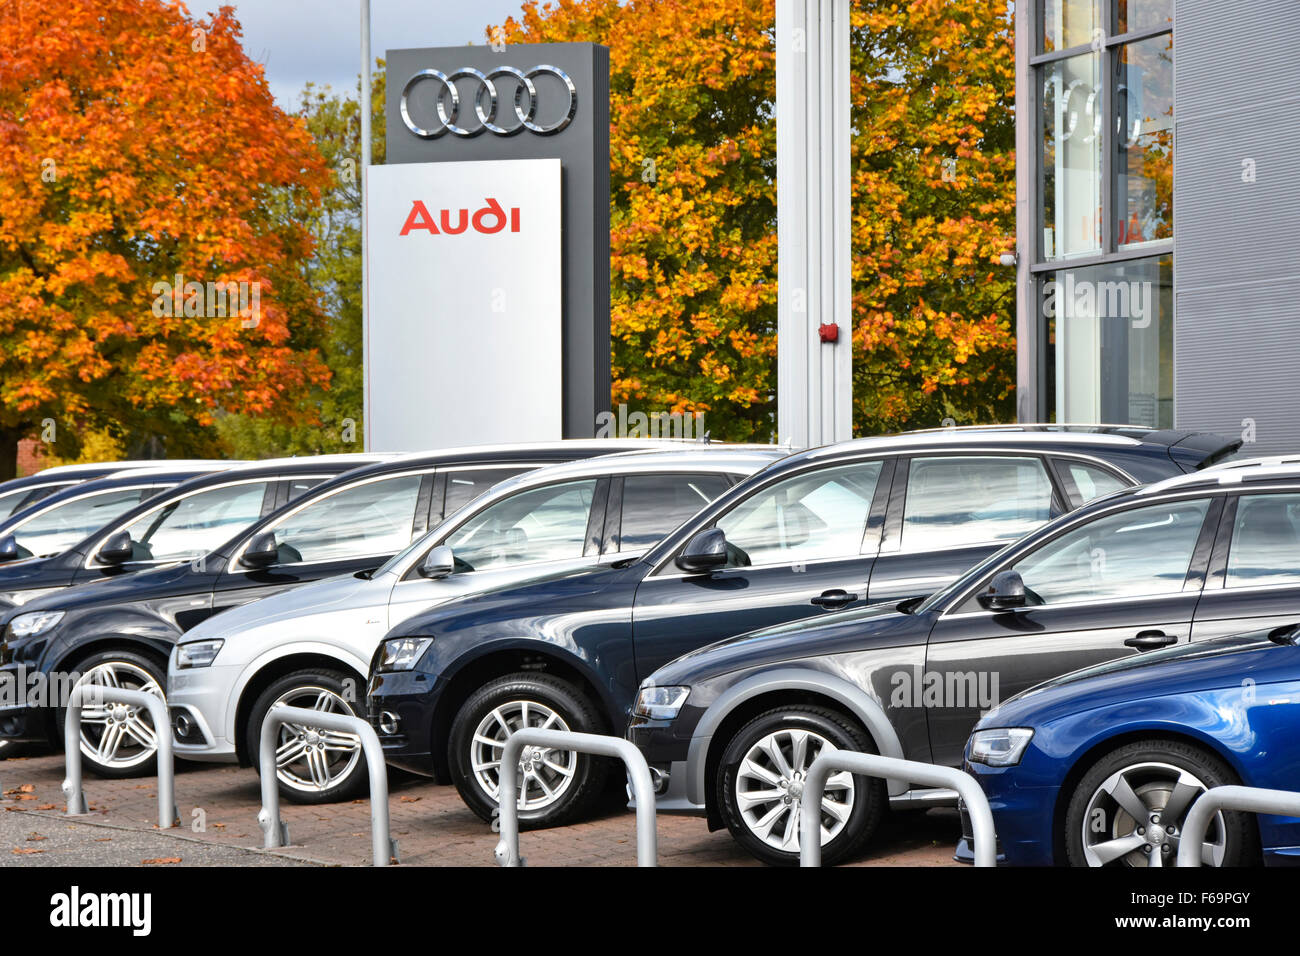 Car dealership Audi car dealer sign with cars for sale outside car showroom on forecourt Essex England UK end of supply chain Stock Photo